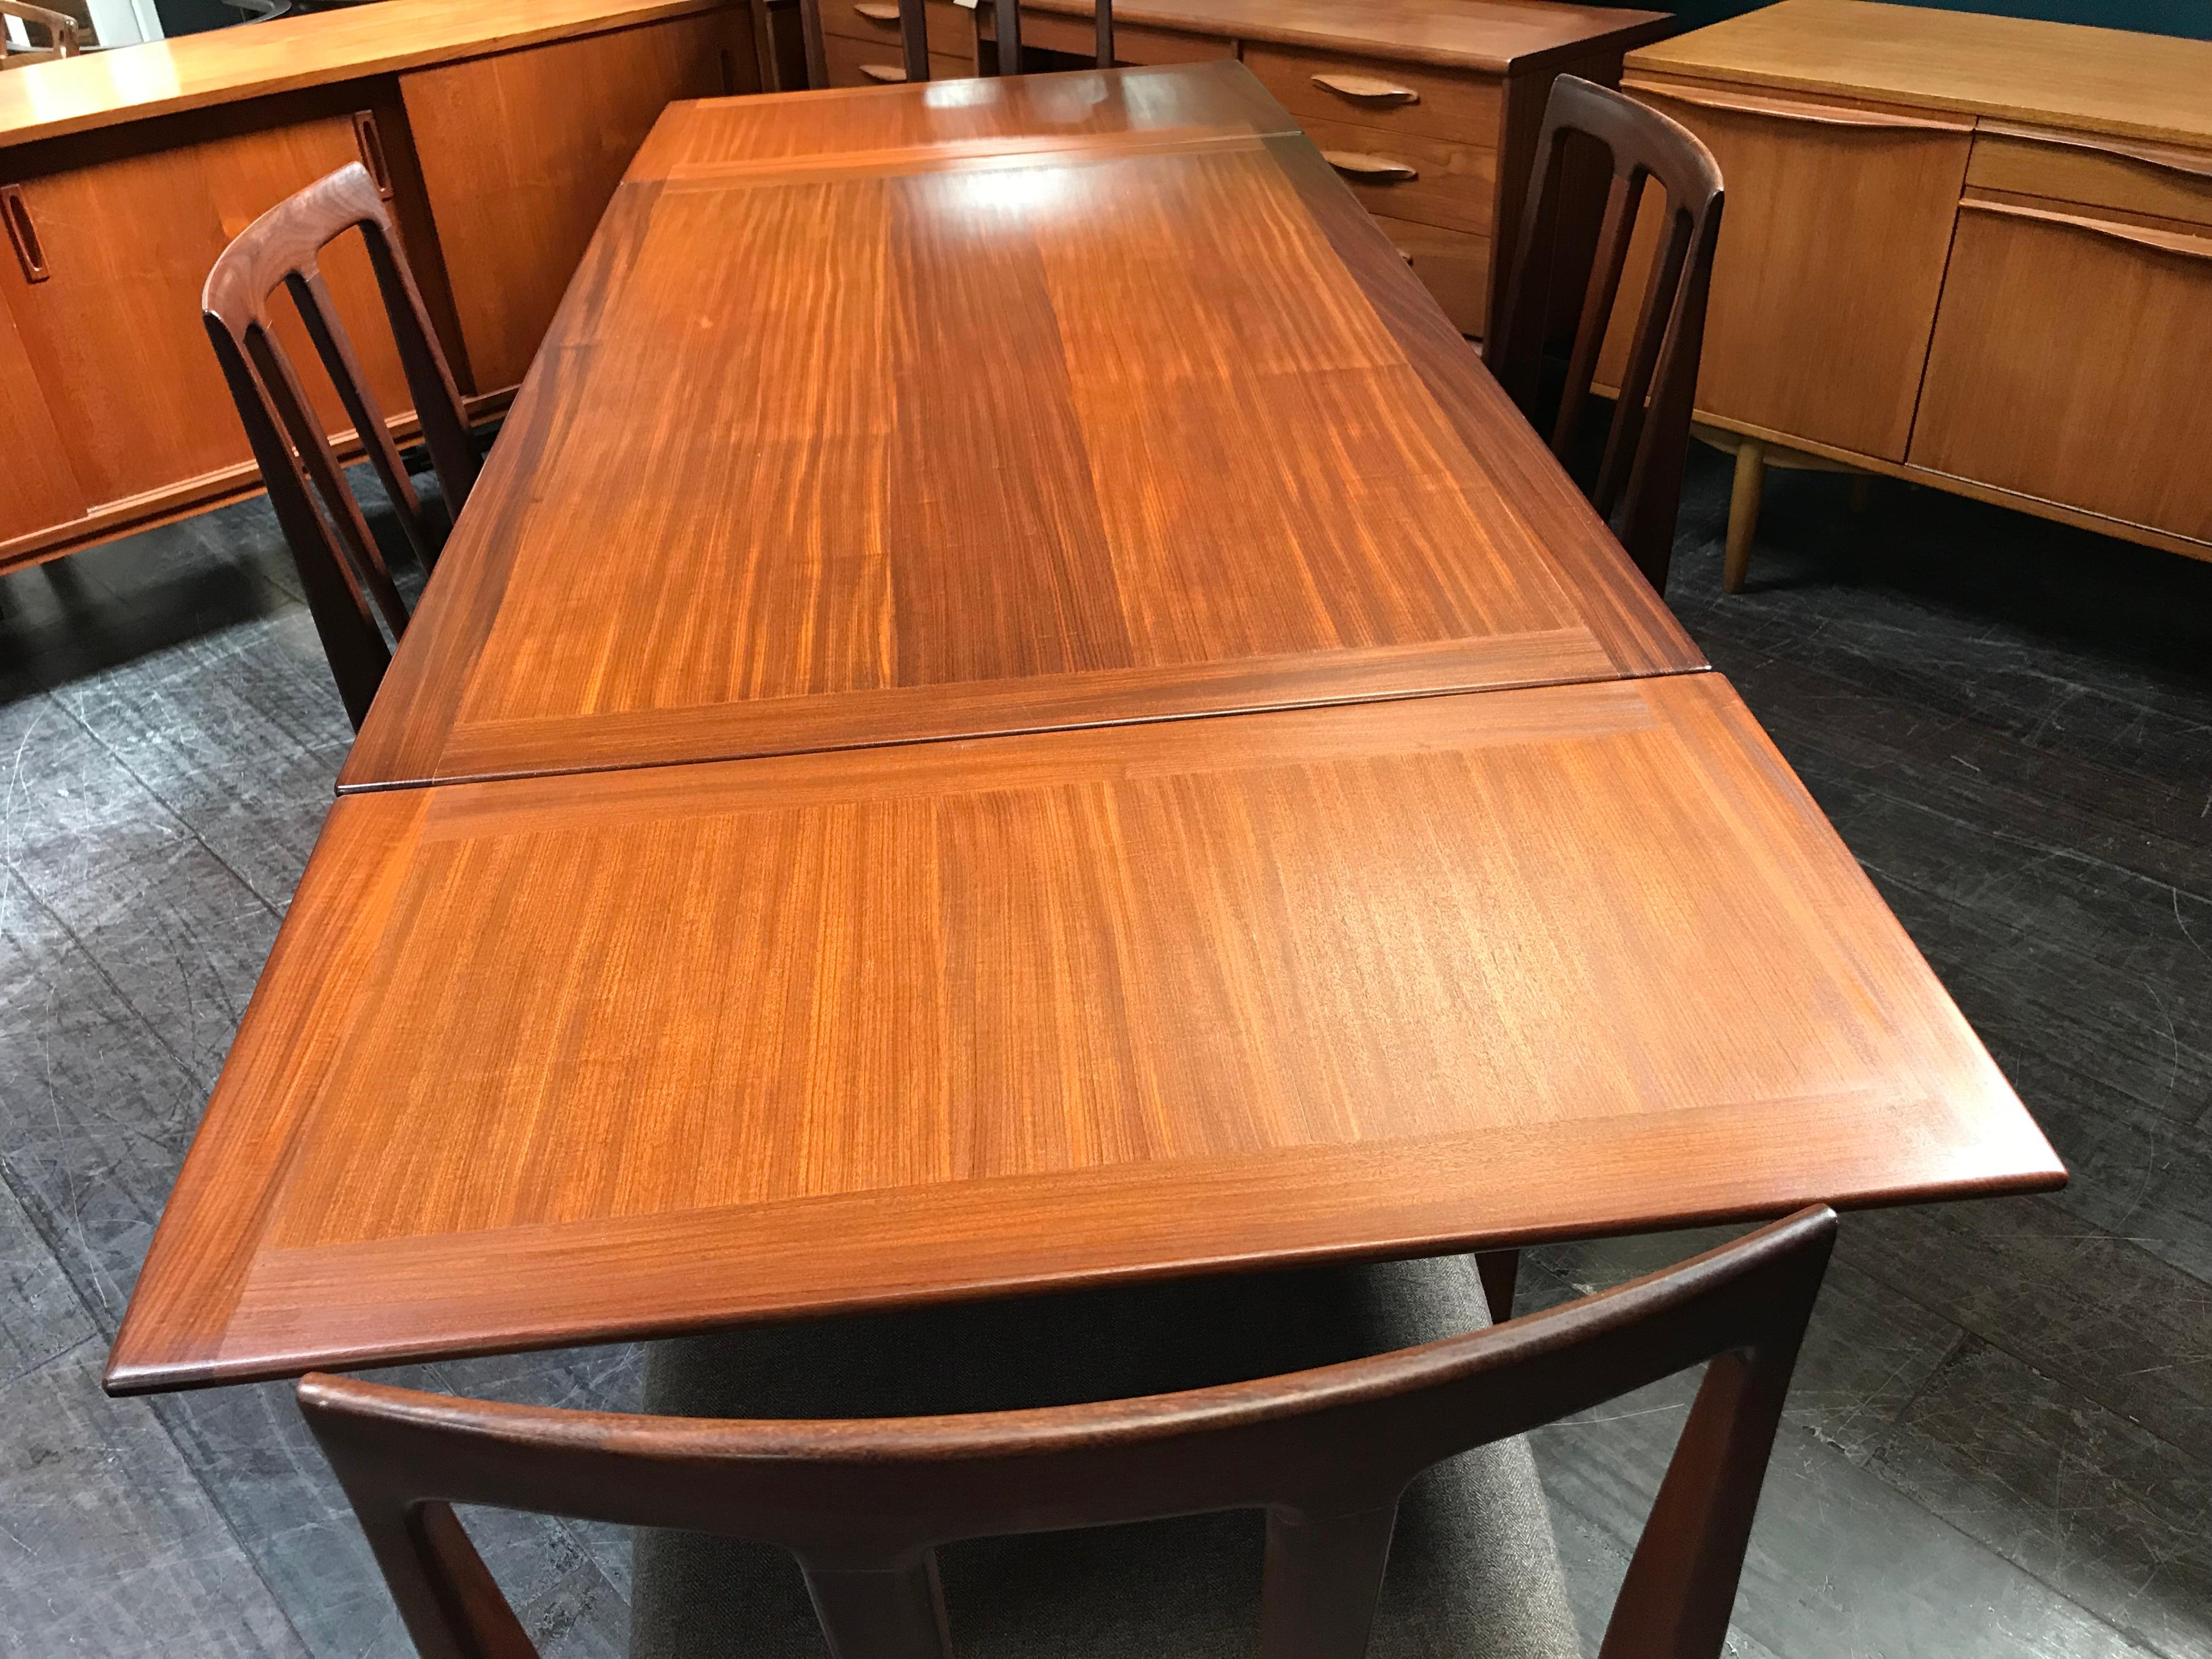 Extending Midcentury Afrormosia Dining Table with 4 Chairs by Younger of Glasgow For Sale 8